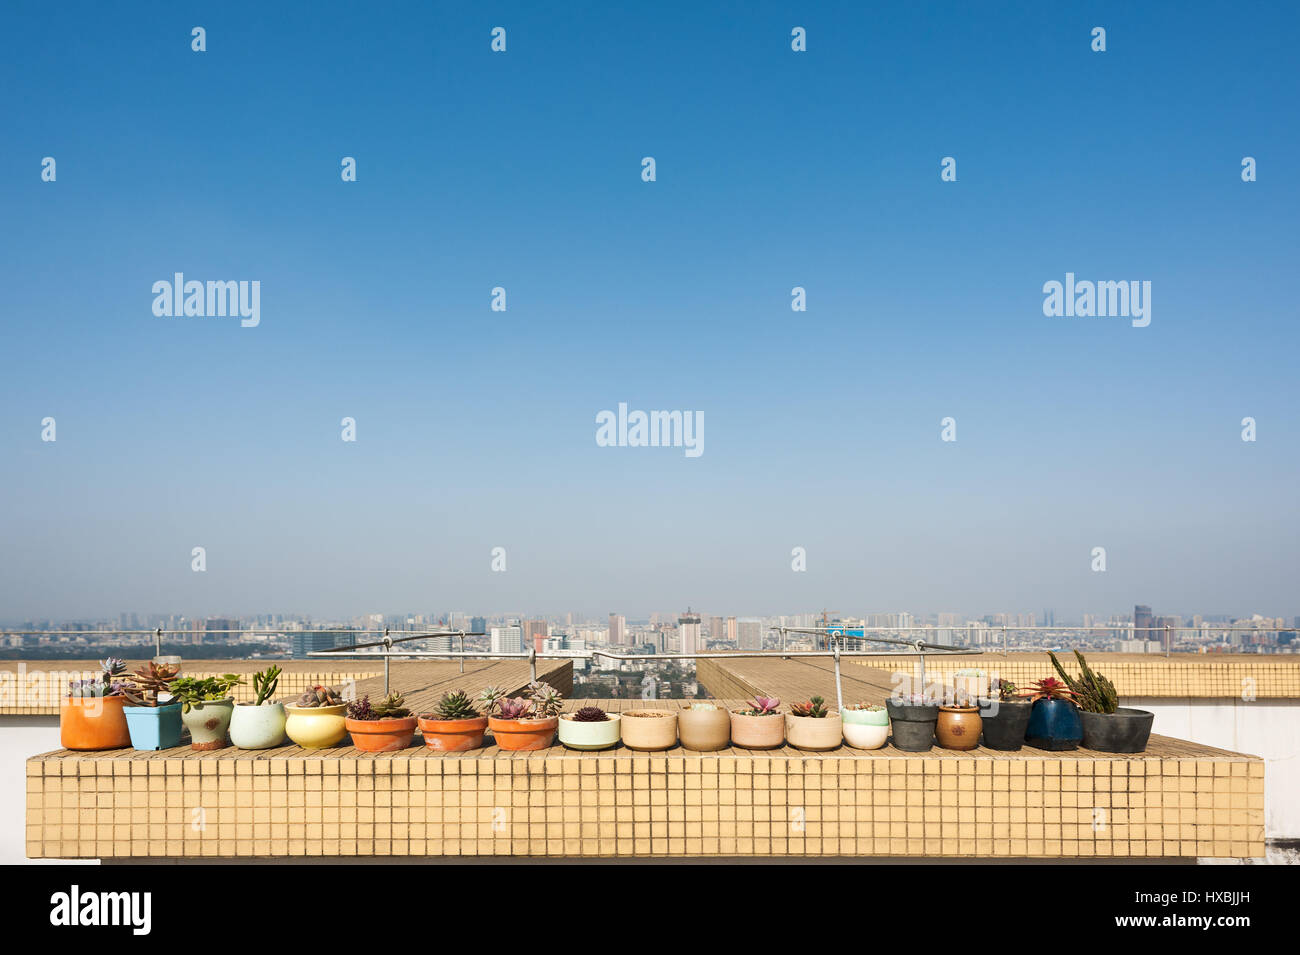 row of small plants on a building roof against blue sky Stock Photo